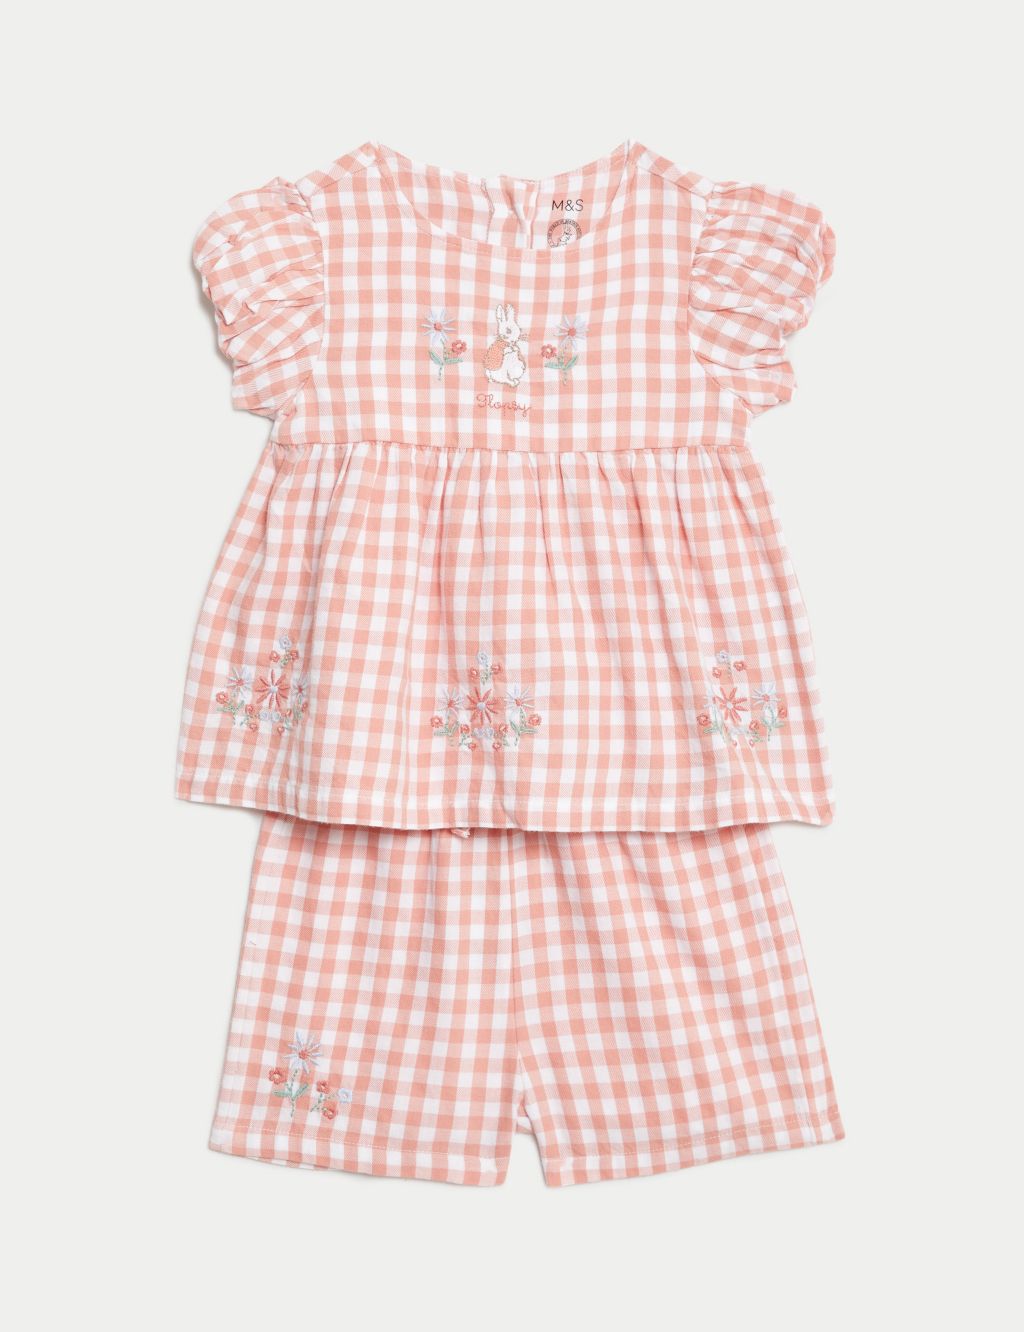 Shop Page 6 - Baby Clothes | Baby & Toddler Clothes | M&S